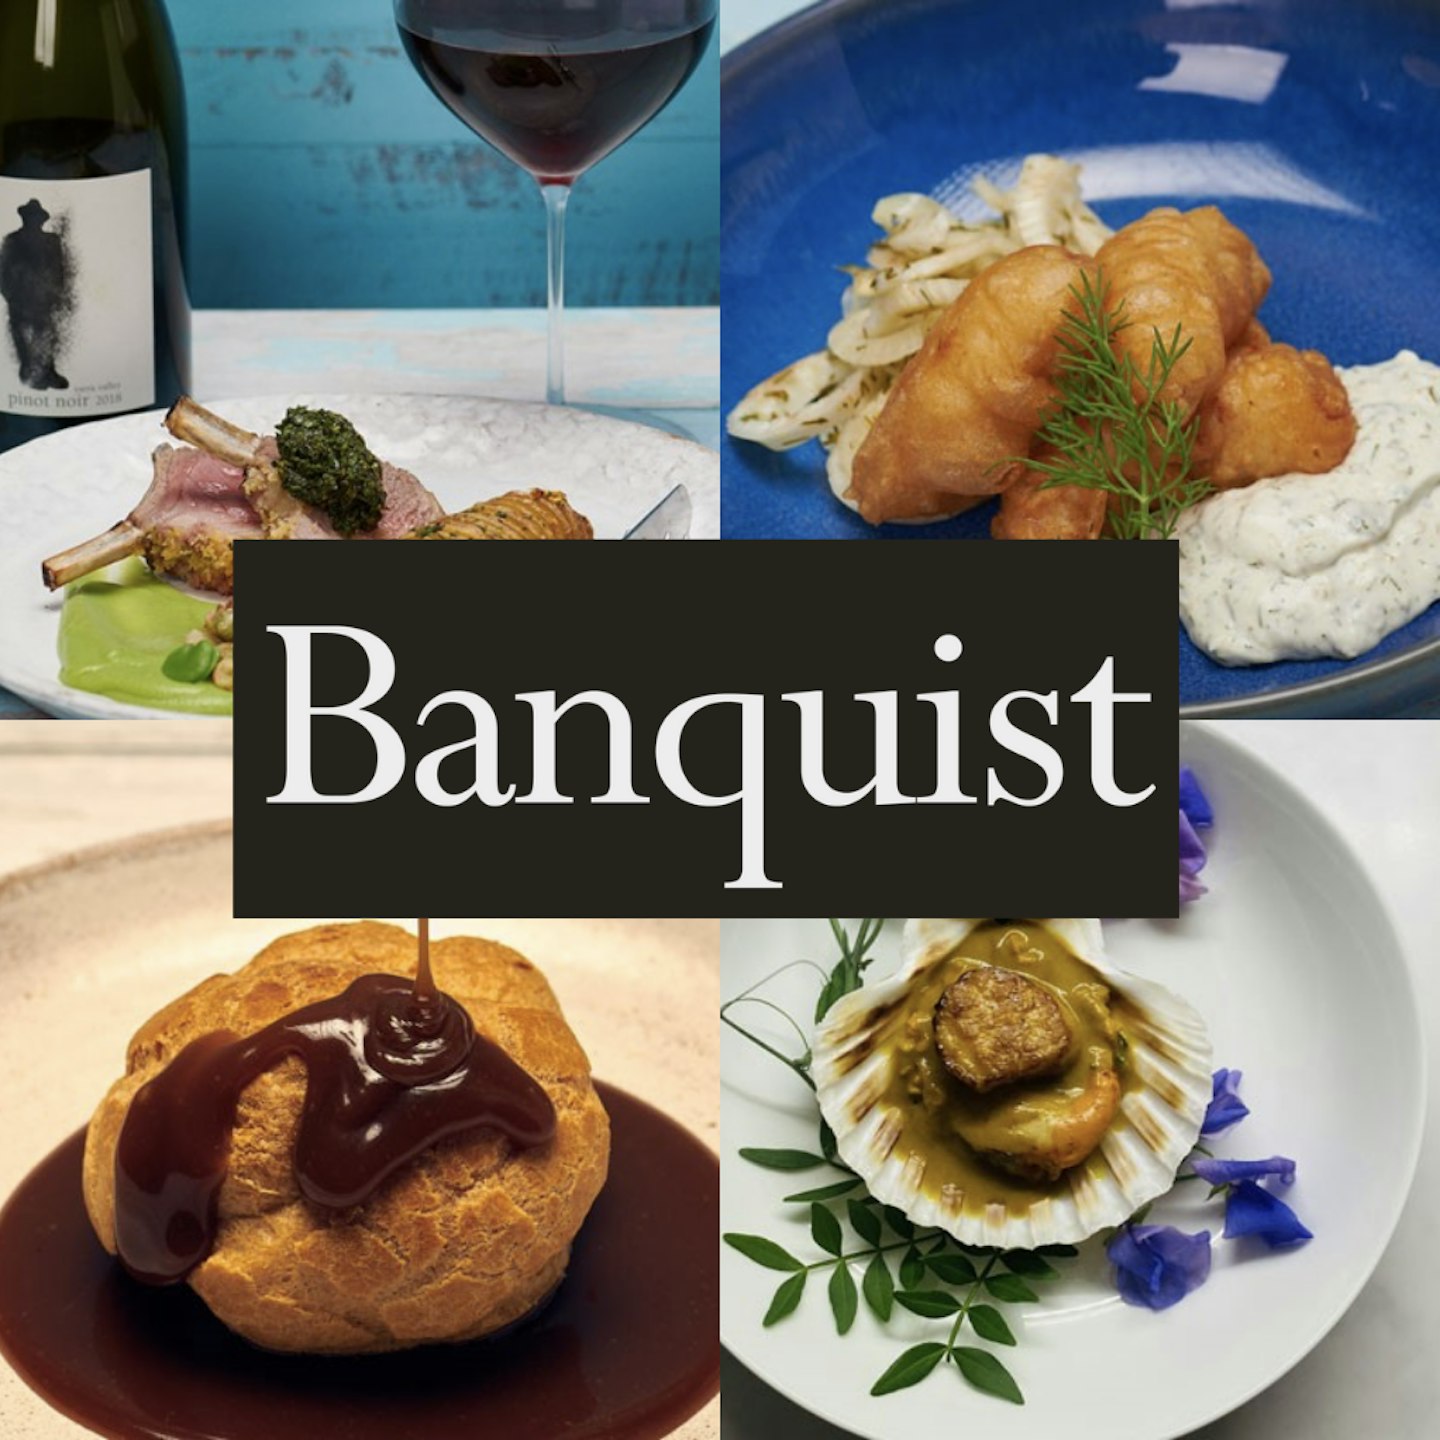 Three Course Meal and Wine at Home Dining Experience with Banquist for Two